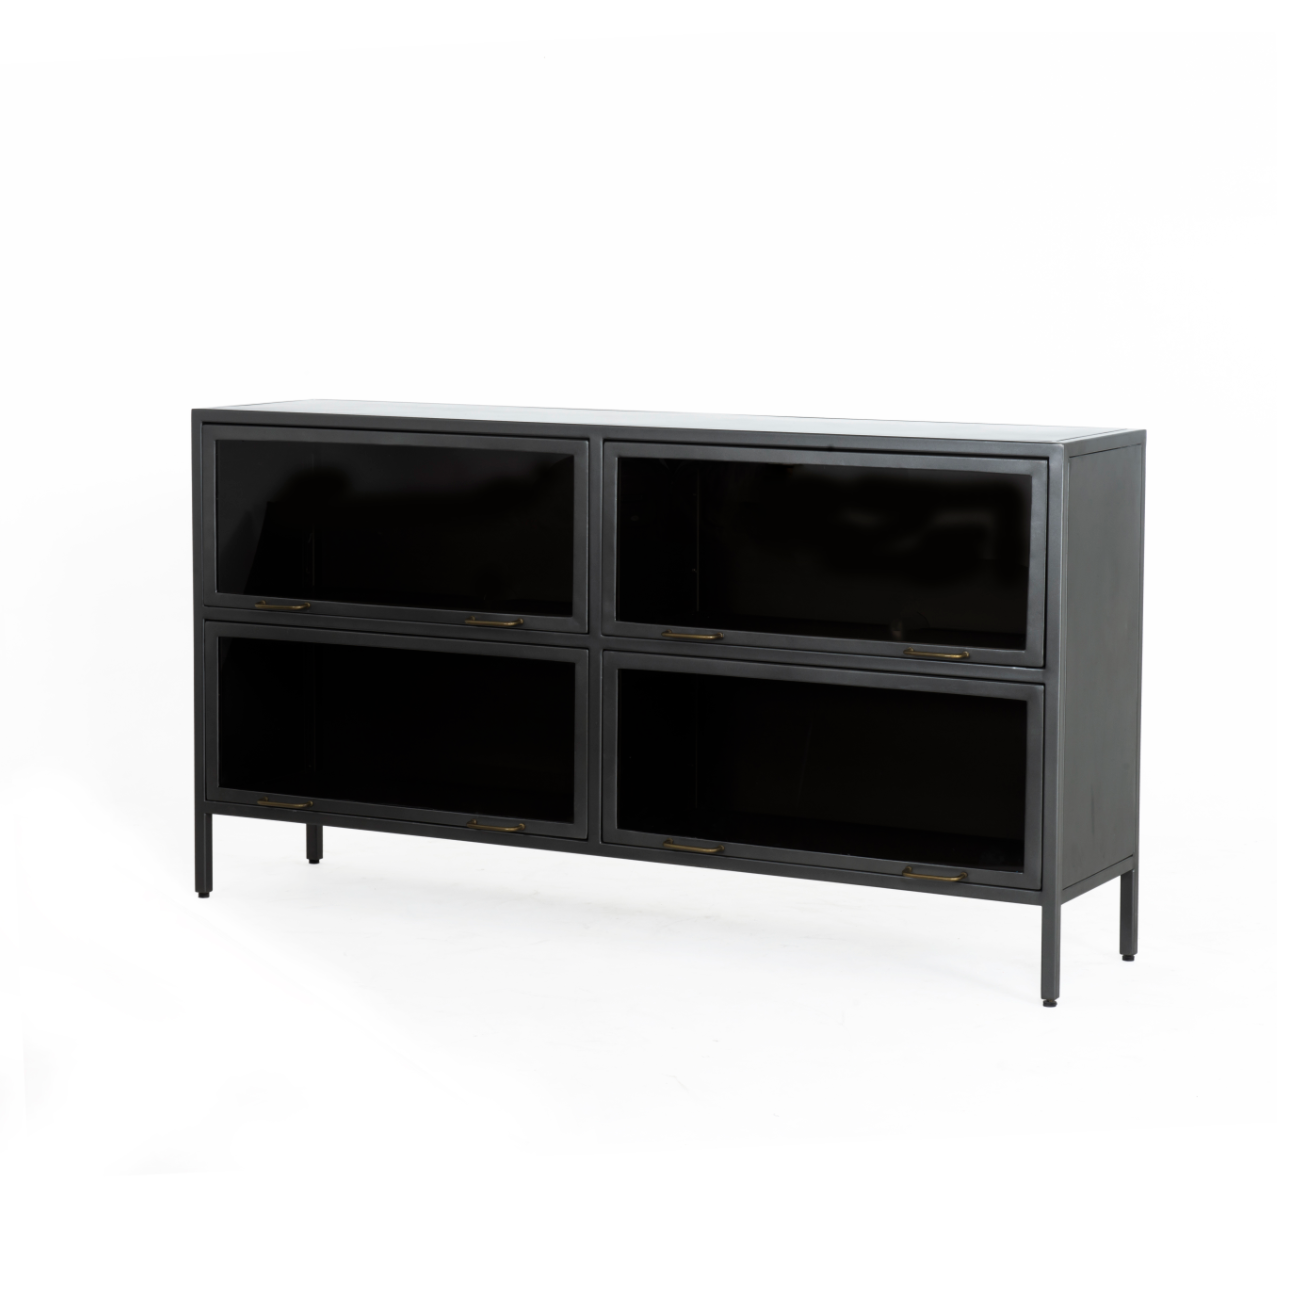 Inspired by the stackable barrister-style shelving, the Aviva Barrister Sideboard has iron casing finished in a gunmetal for a fresh industrial look, with smoked glass panes with brass hardware cover door fronts, each lifting to spacious compartments for storage of media, tableware and more.  Overall Dimensions: 65"w x 15"d x 36.5"h Colors: Smoked Glass, Flat Brass, Gunmetal Materials: Glass, Iron